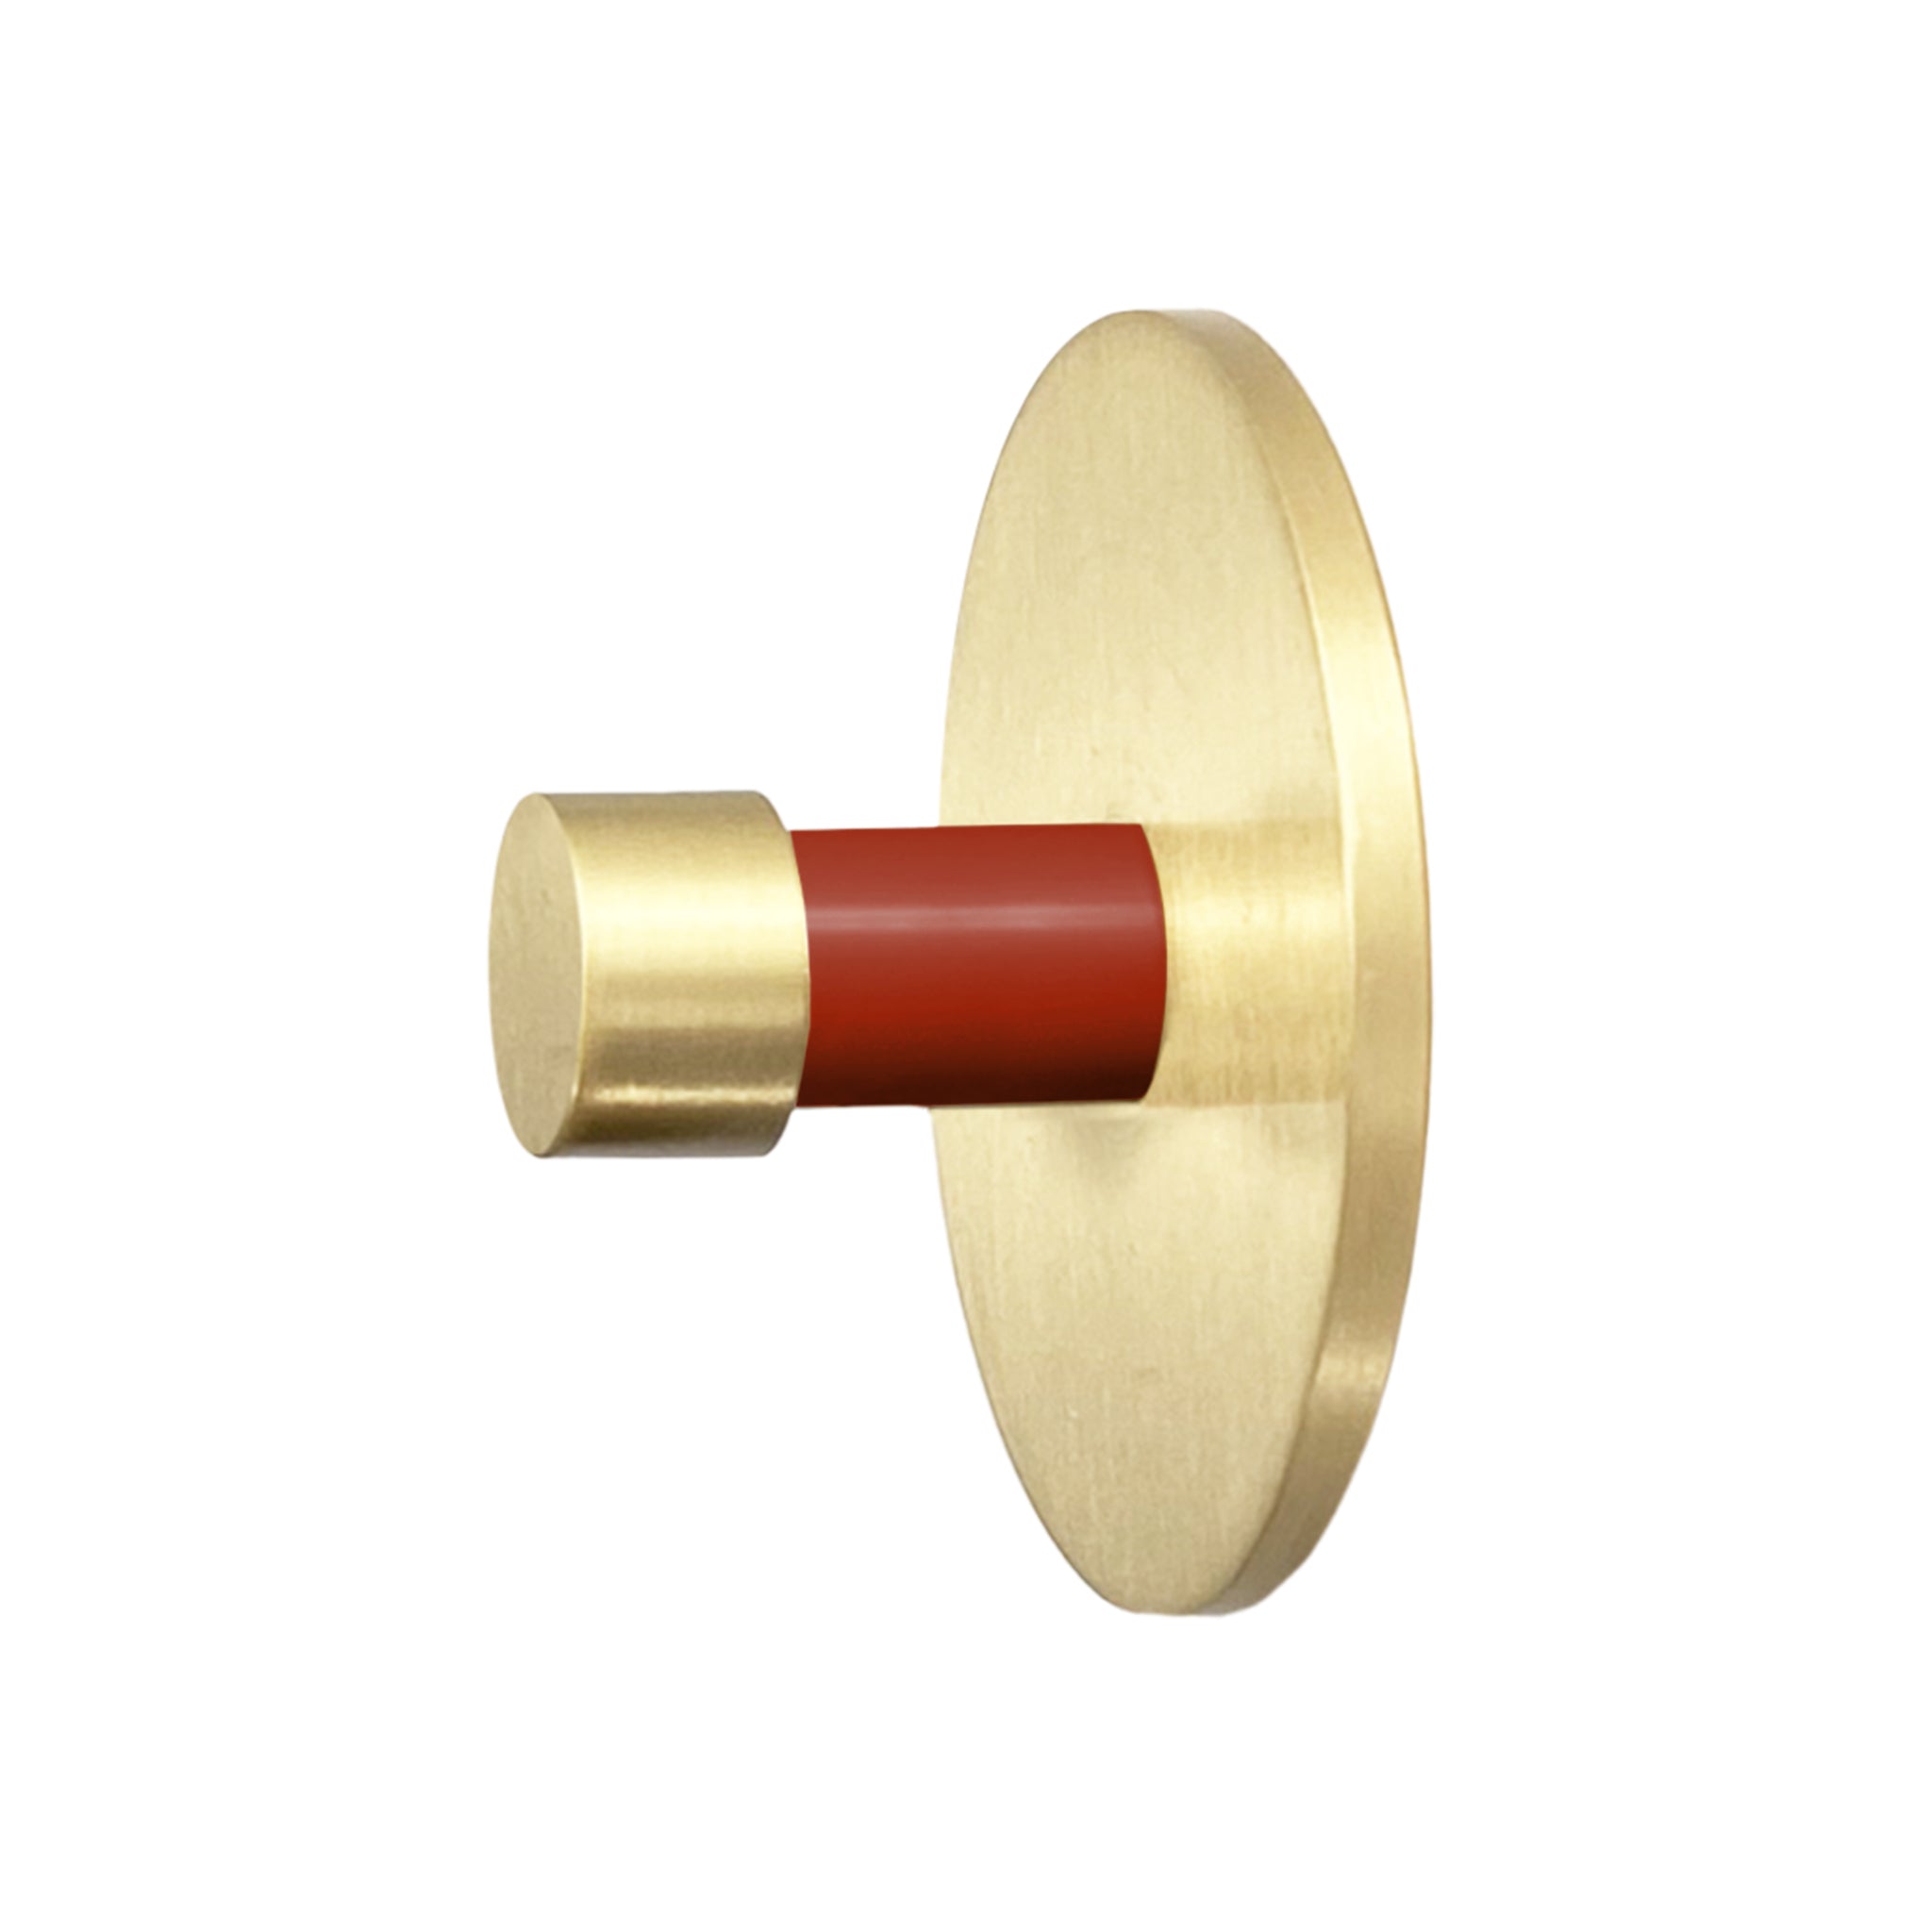 Brass and riding hood red color Bae knob Dutton Brown hardware